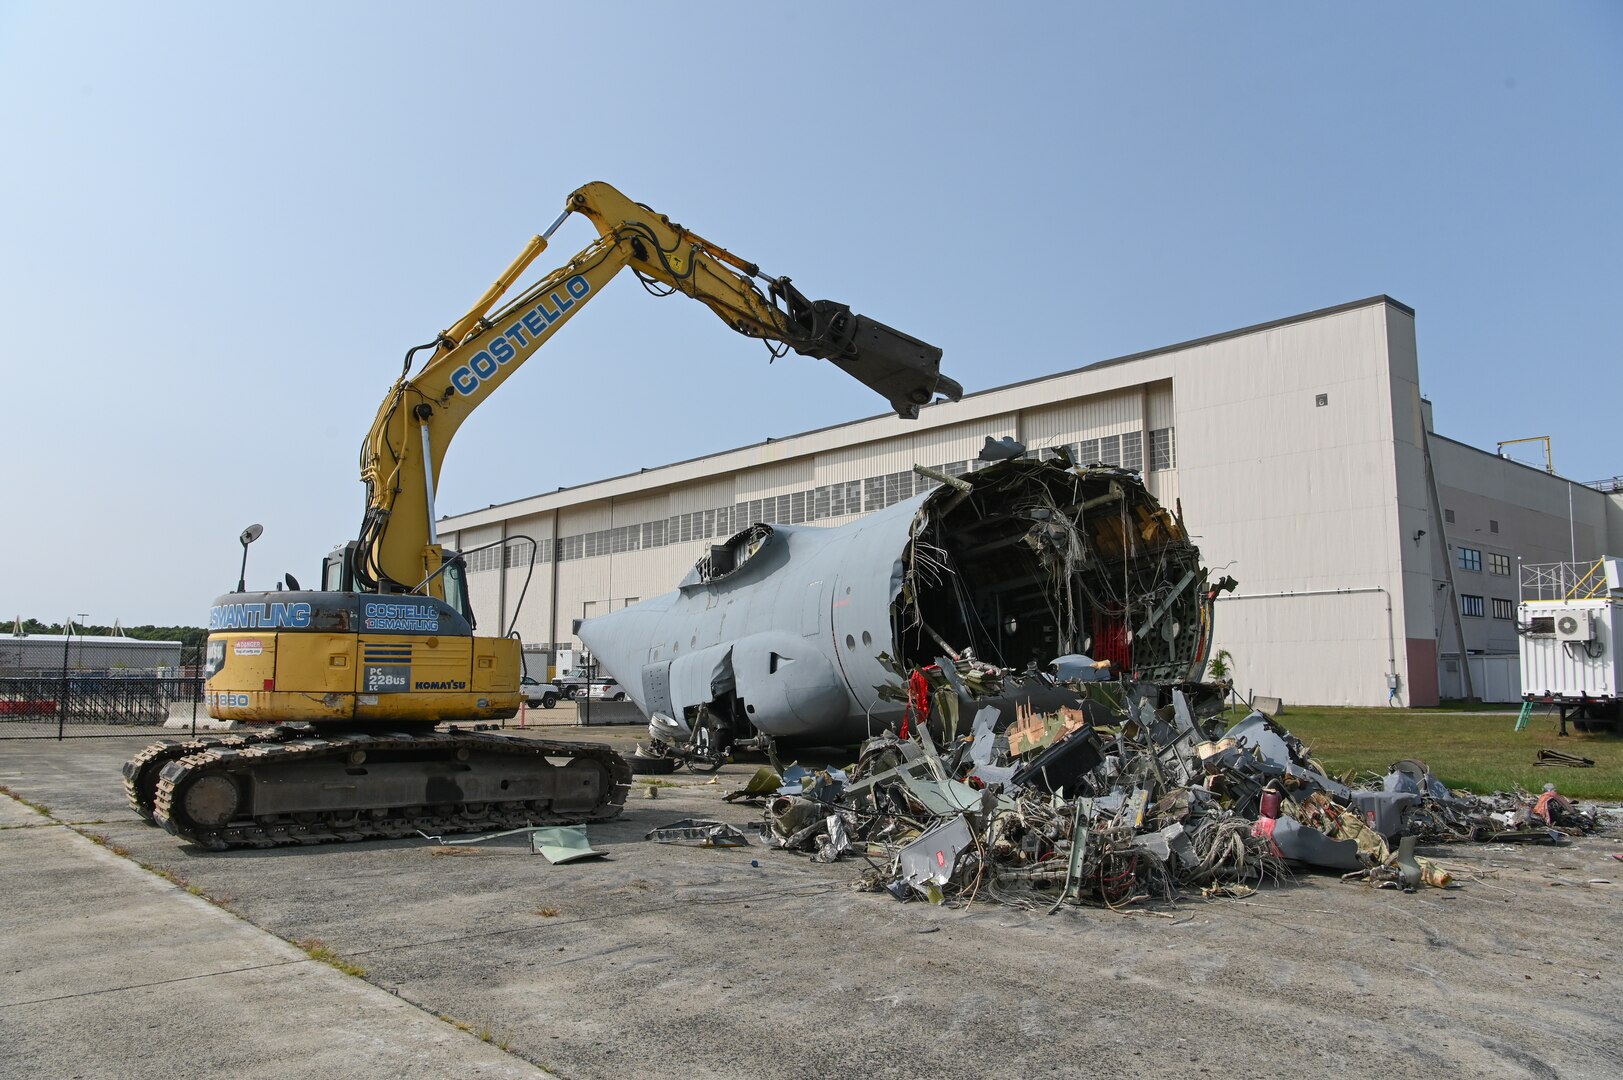 An excavator tears apart a large military transport plane.